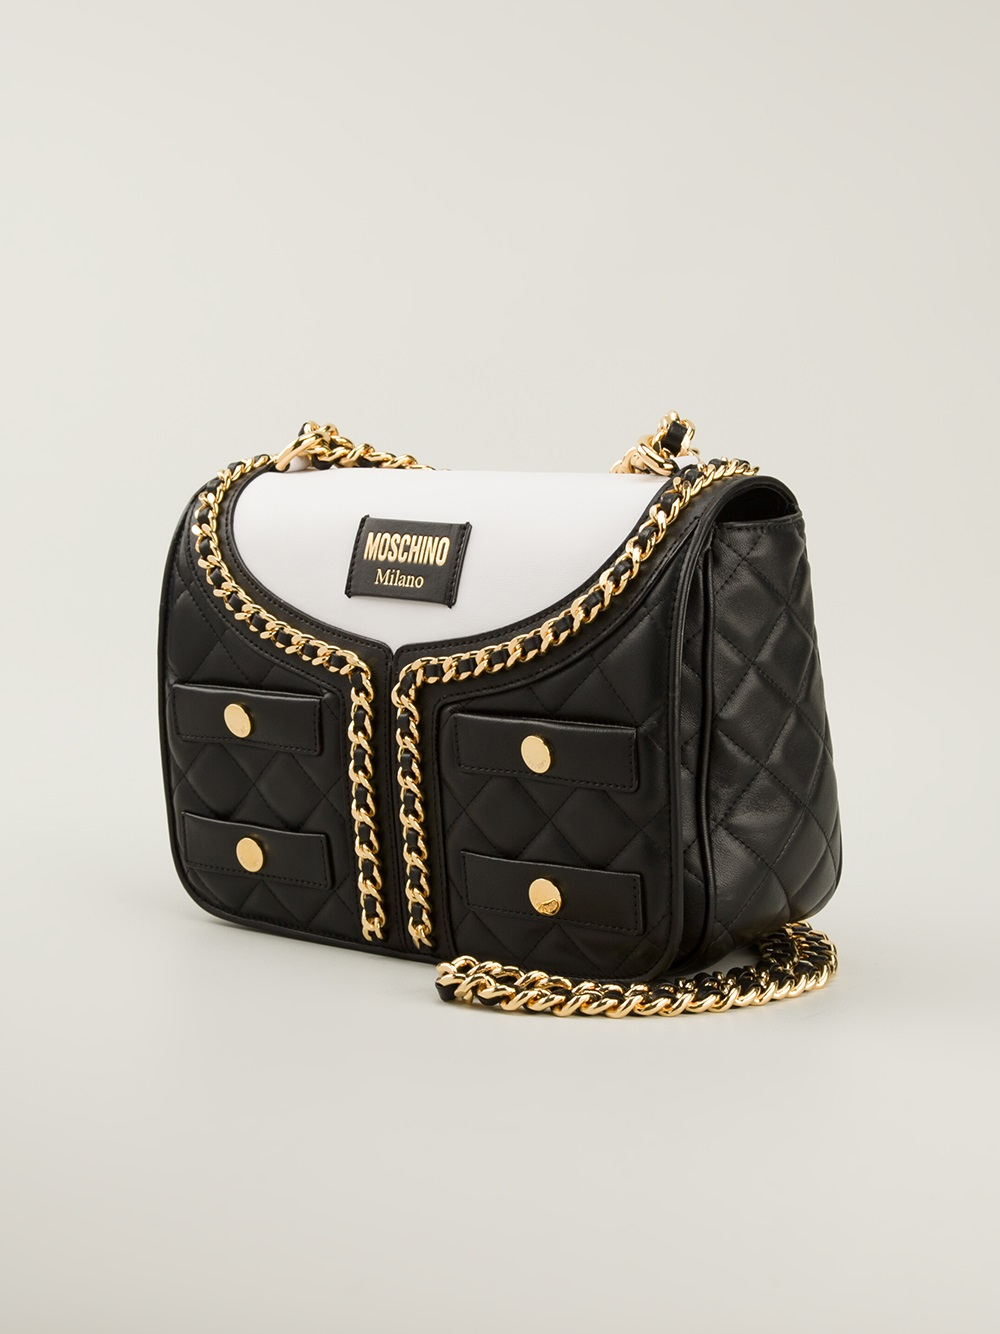 Moschino Quilted Jacket Shoulder Bag in Black - Lyst